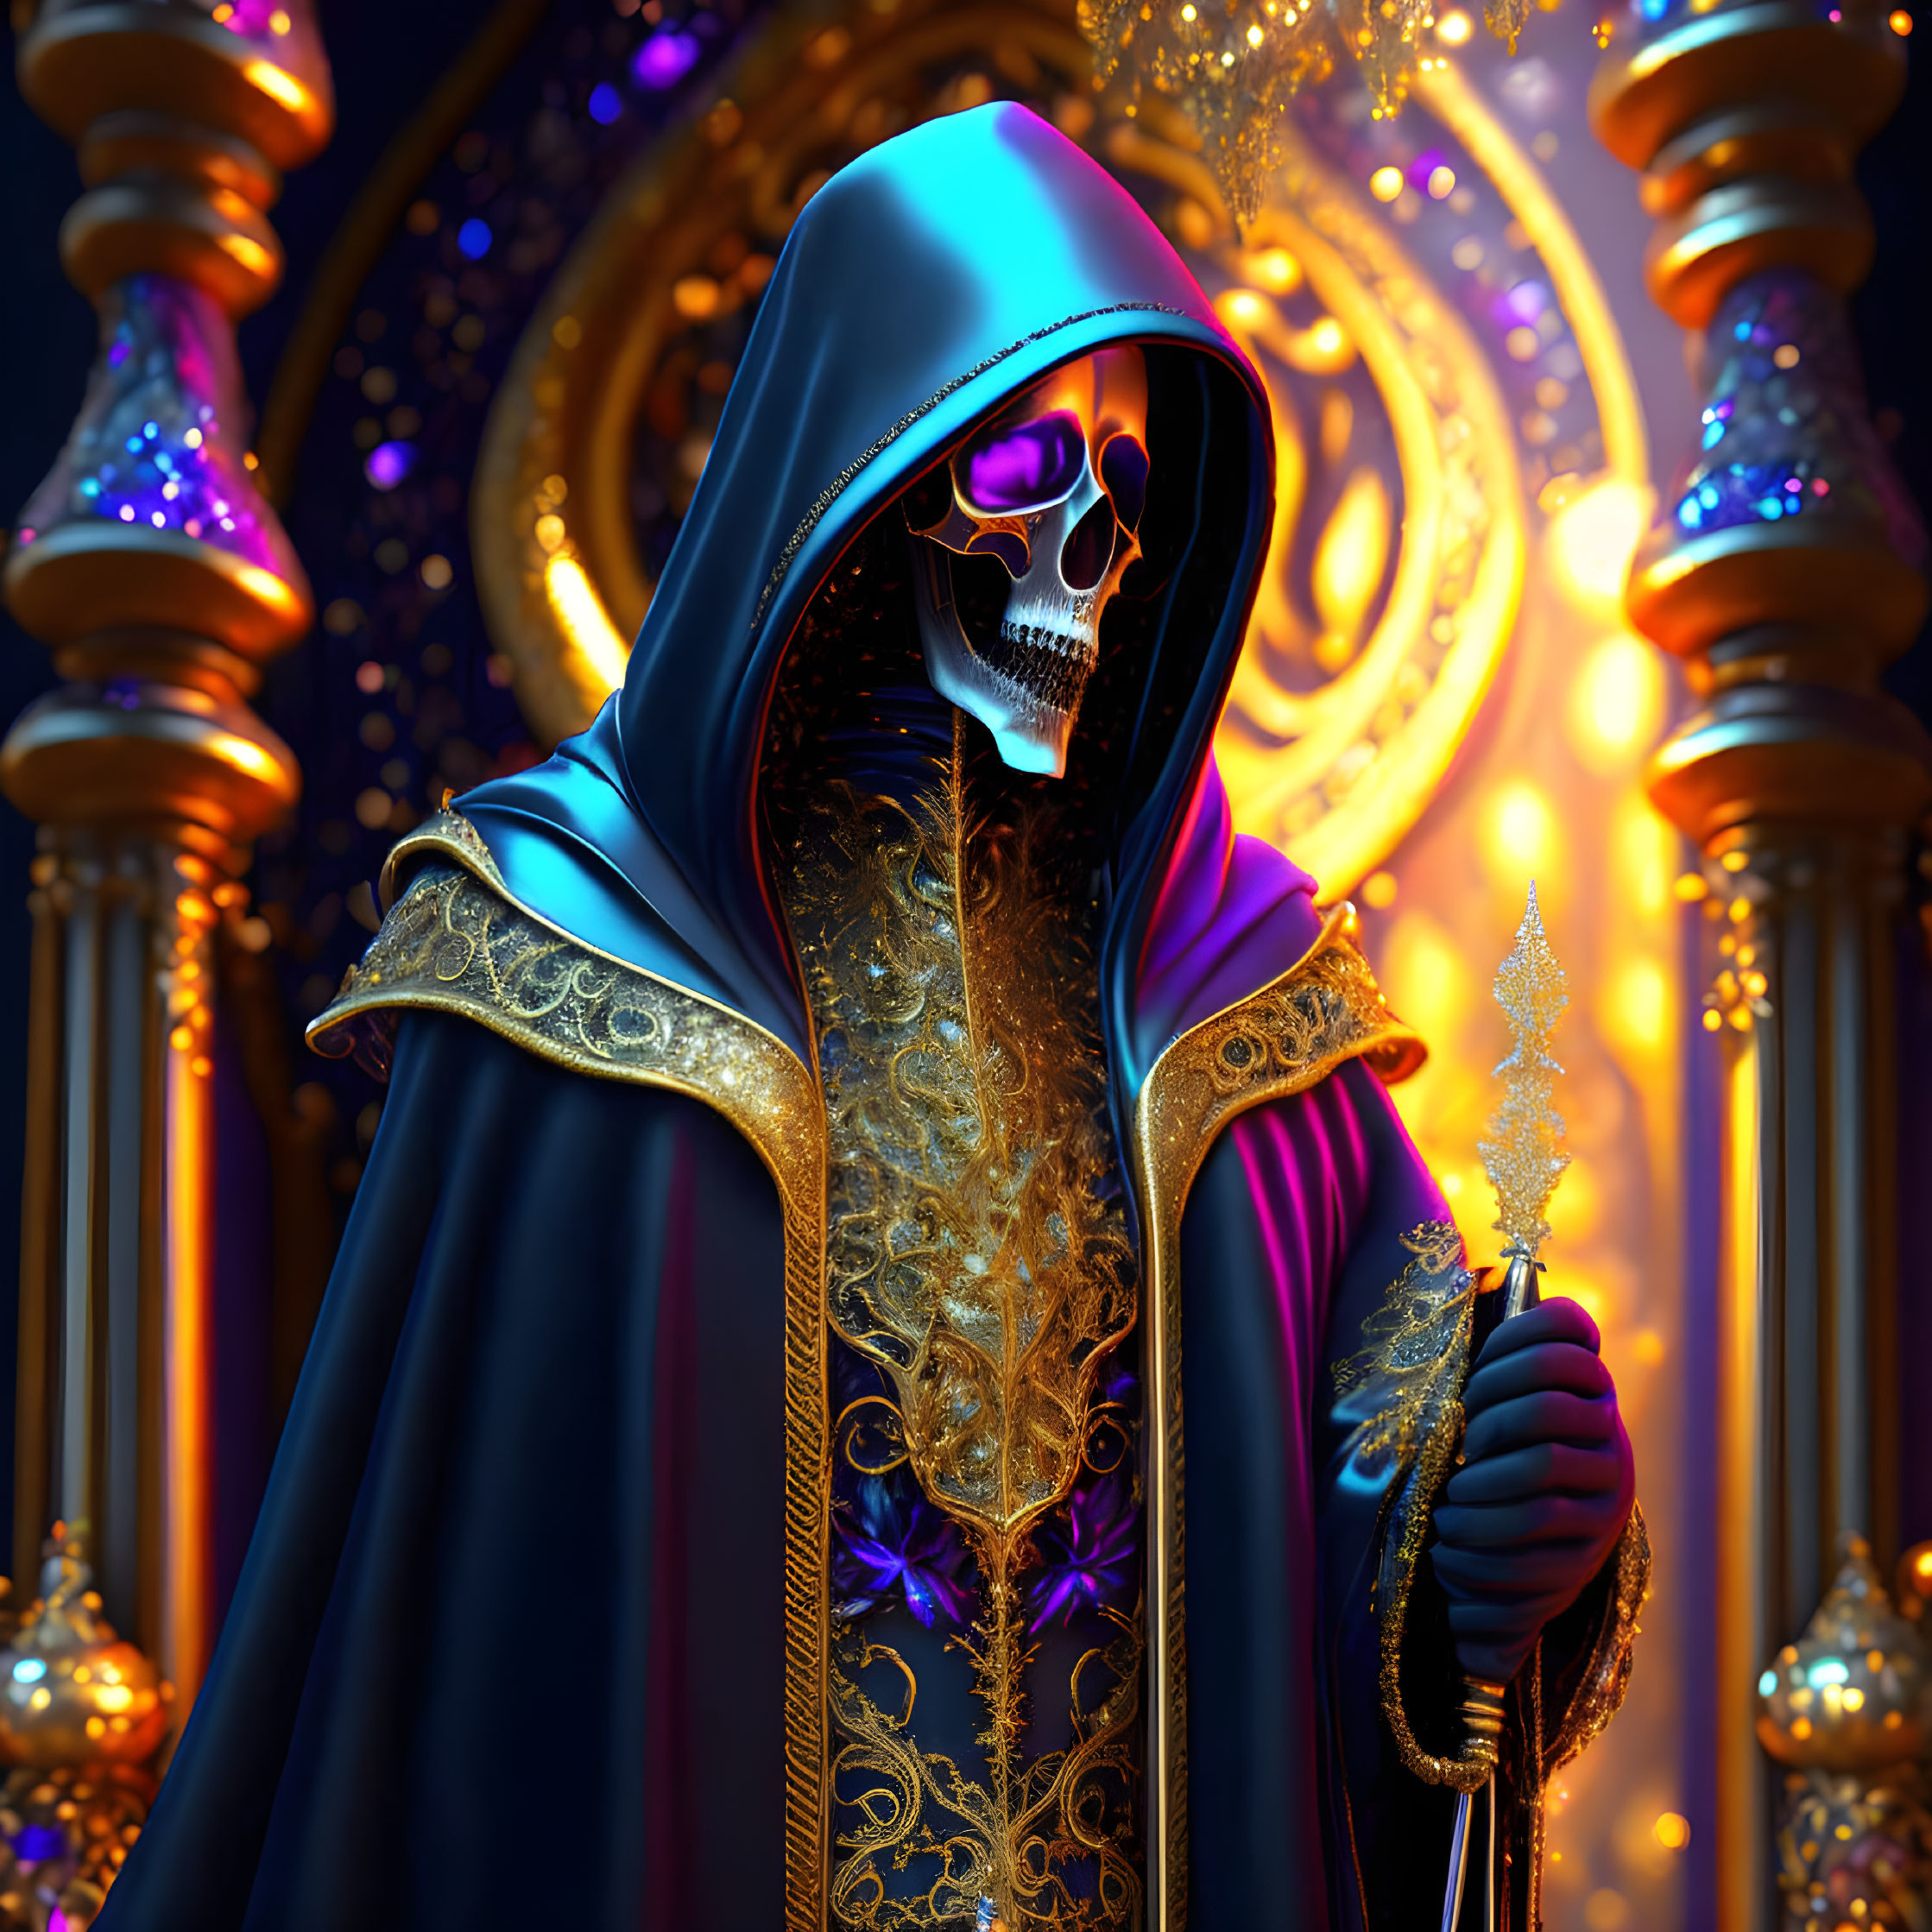 Detailed Blue and Gold Robed Skeletal Figure with Staff on Luminescent Ornate Background